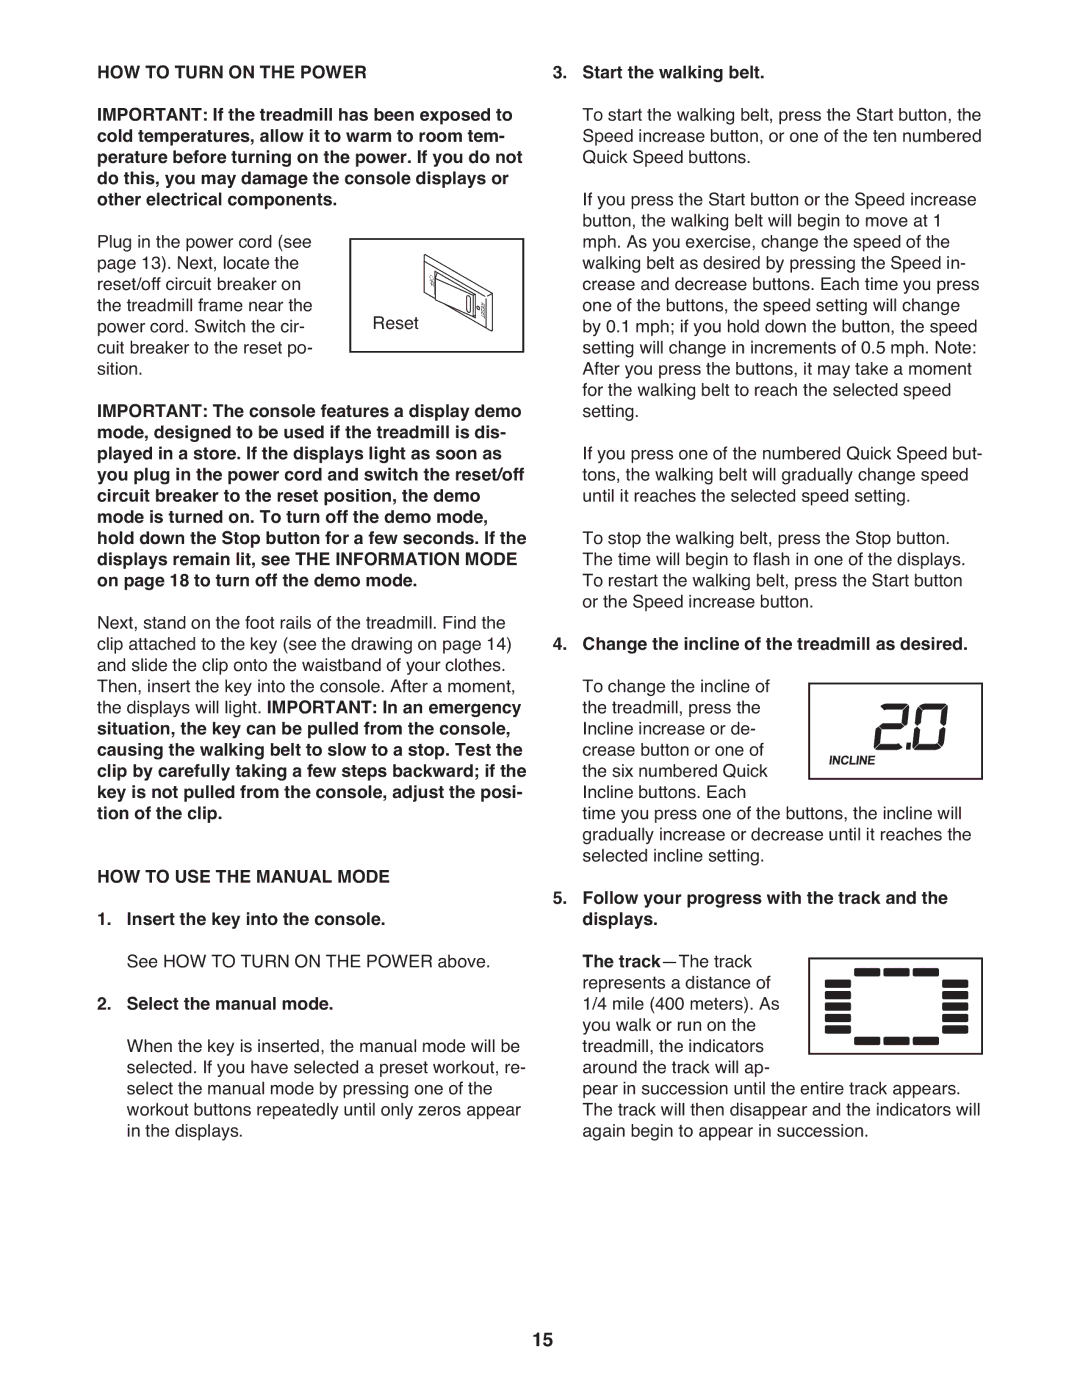 ProForm 590 rt user manual HOW to Turn on the Power, HOW to USE the Manual Mode 